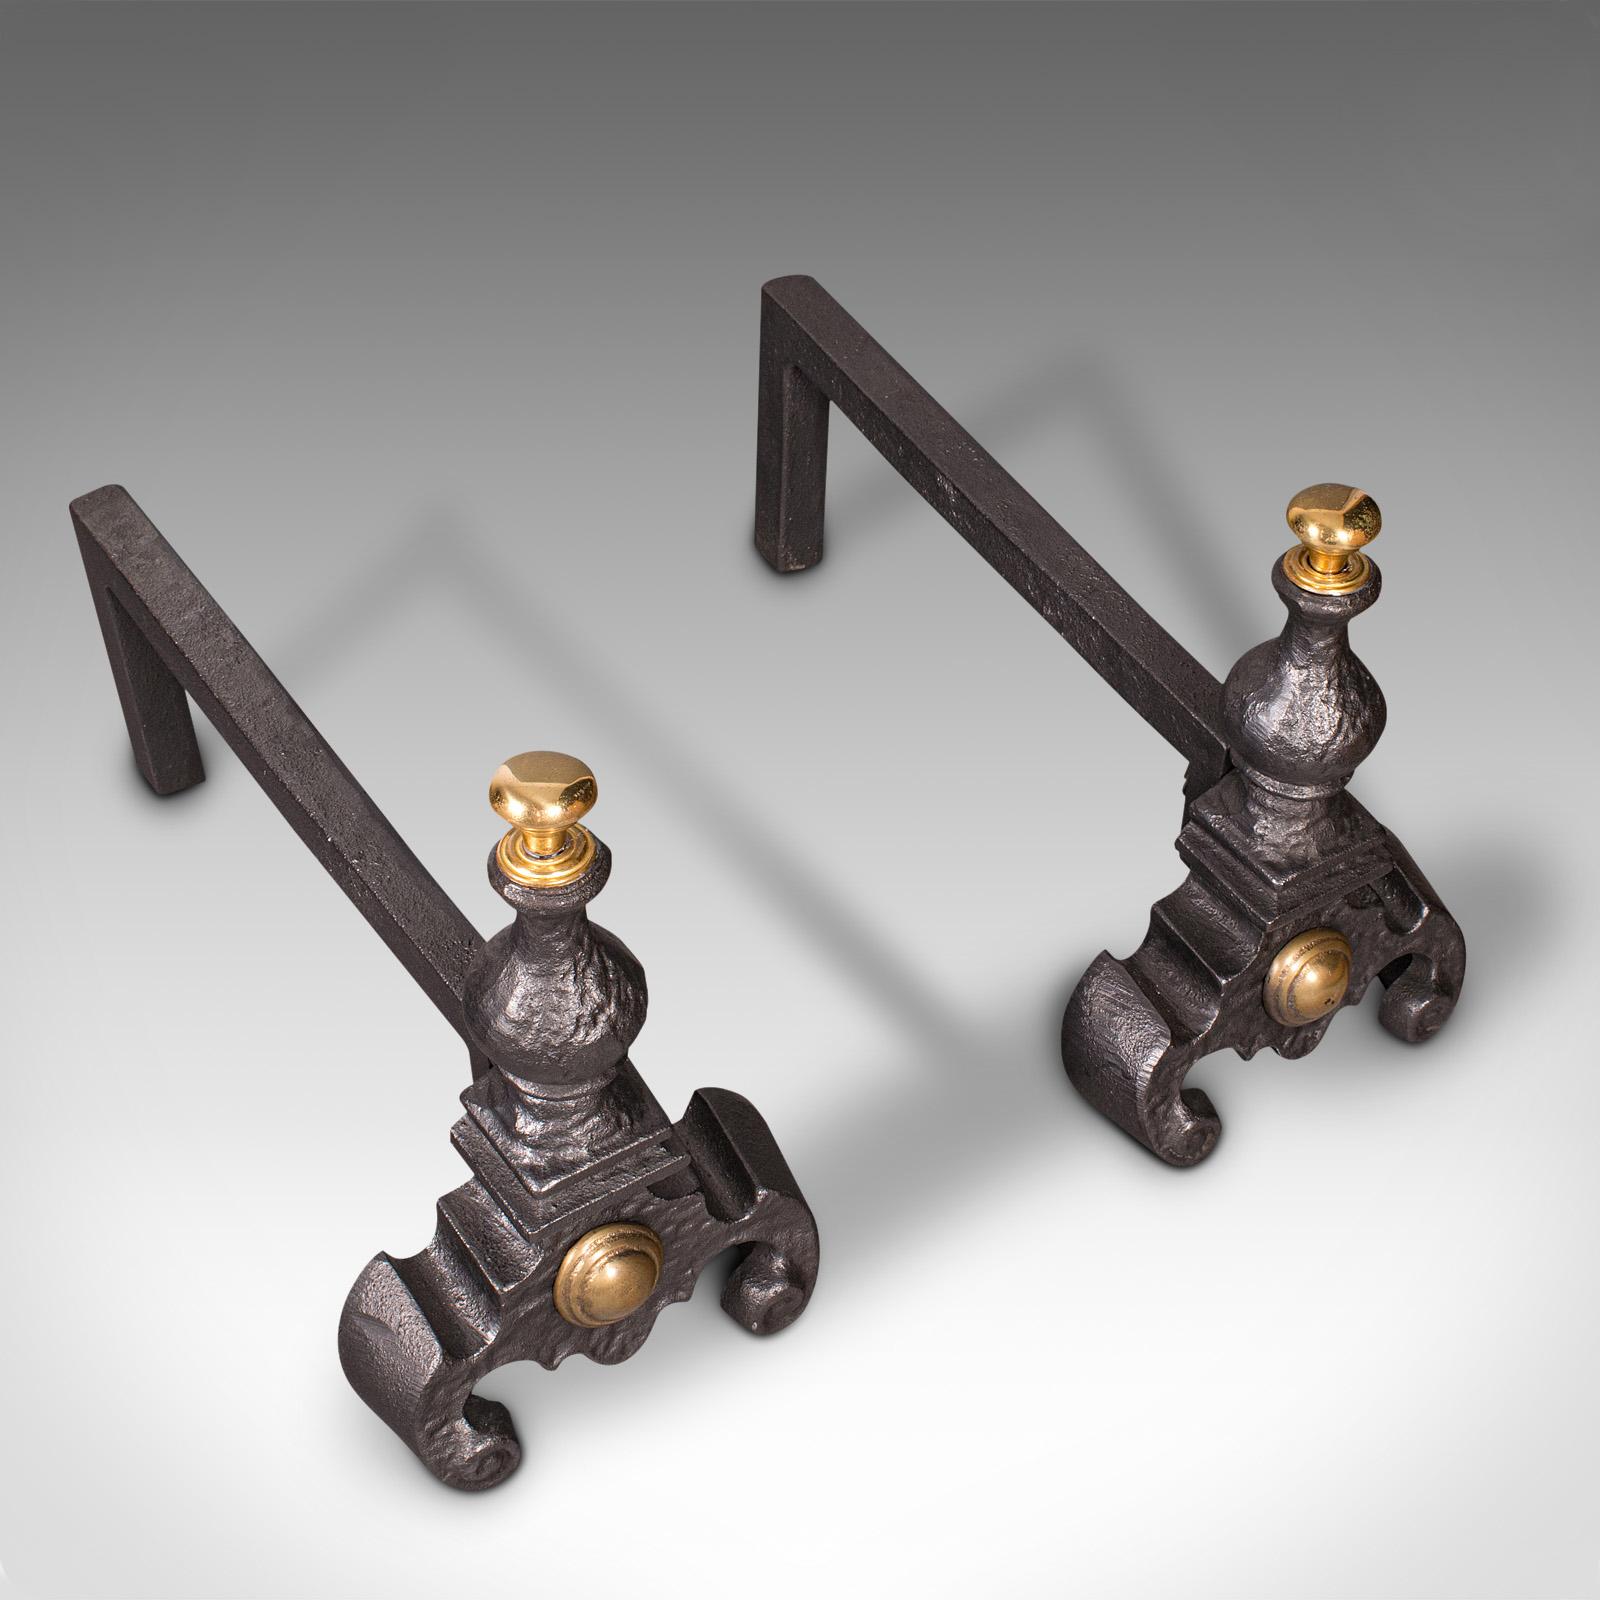 Pair Of Antique Decorative Fire Rests, English Fireside Andiron, Victorian, 1850 In Good Condition For Sale In Hele, Devon, GB